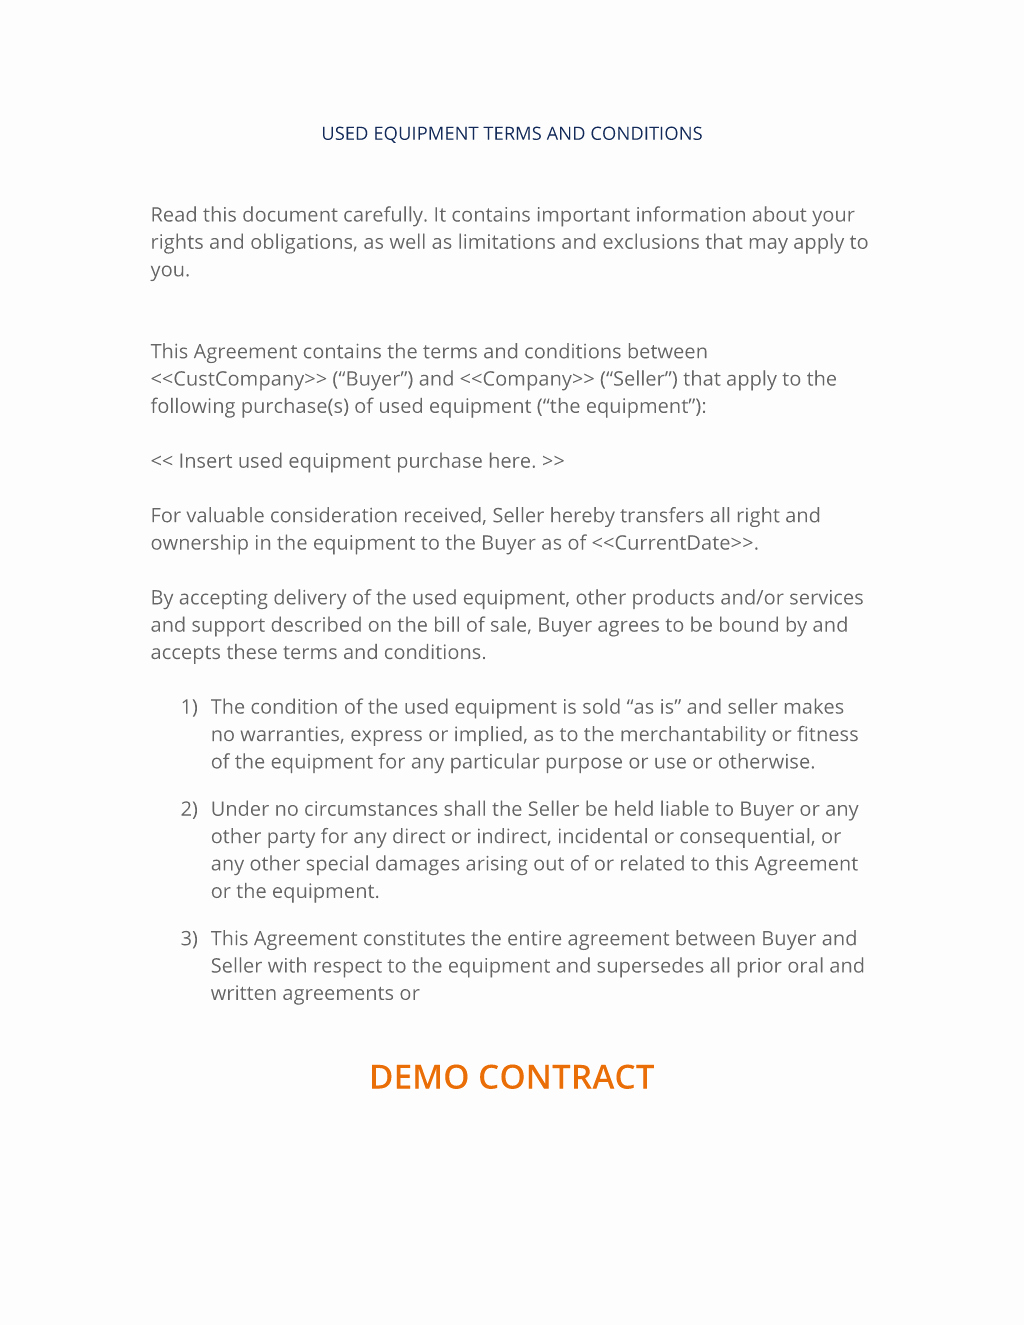 Equipment Purchase Proposal Template Inspirational Sale Of Used Equipment Terms and Conditions 3 Easy Steps